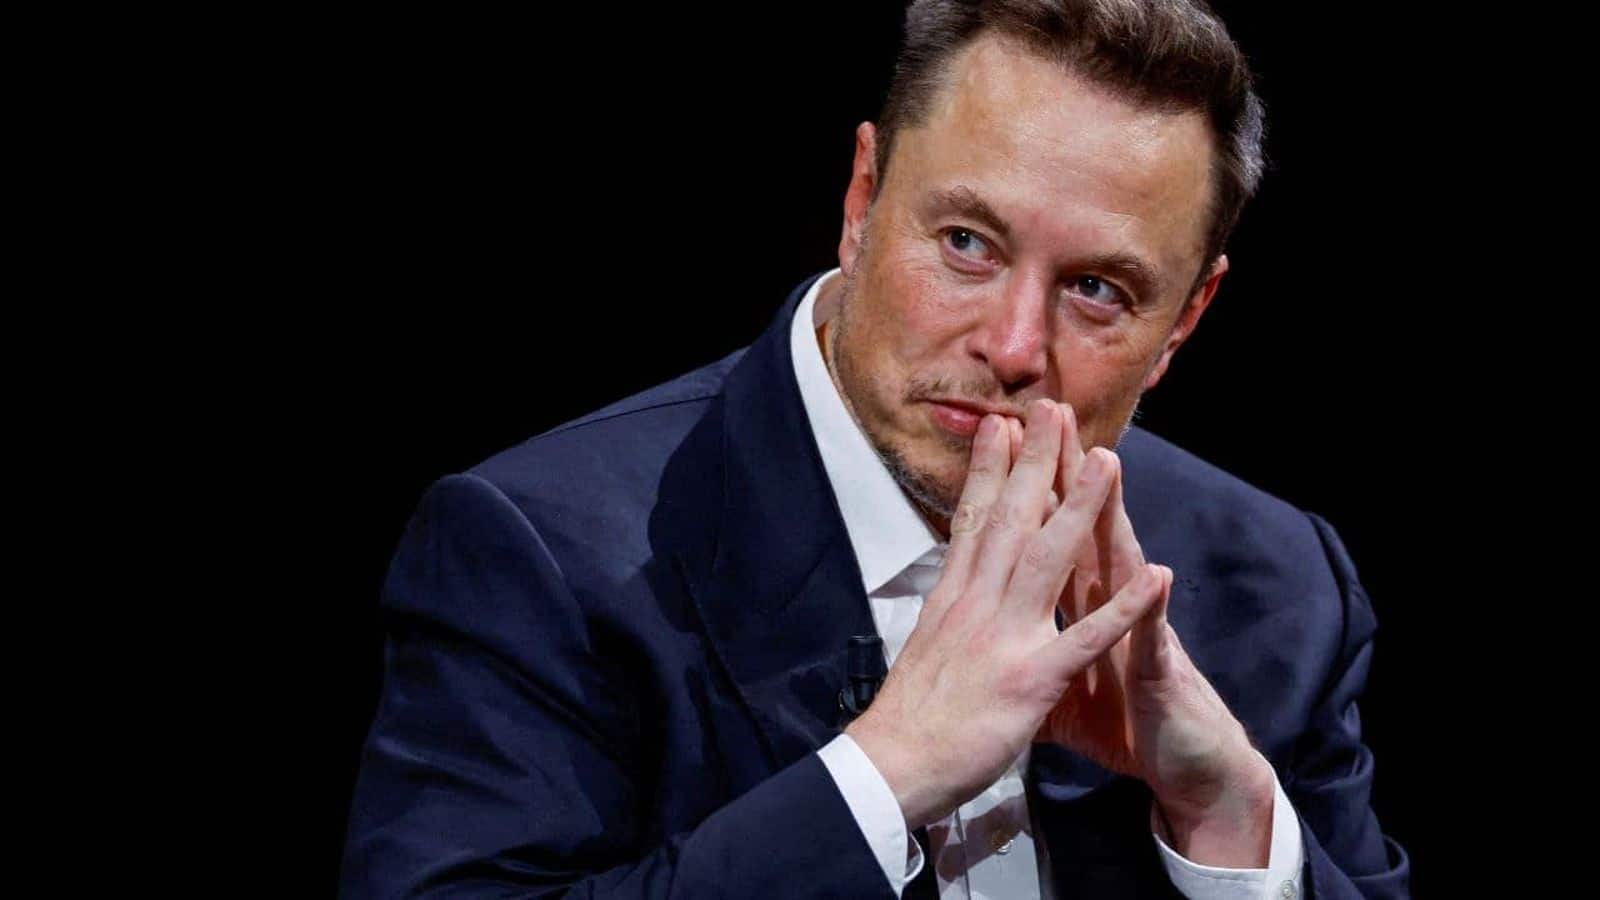 Tesla urges shareholders to reapprove Musk's $56 billion package